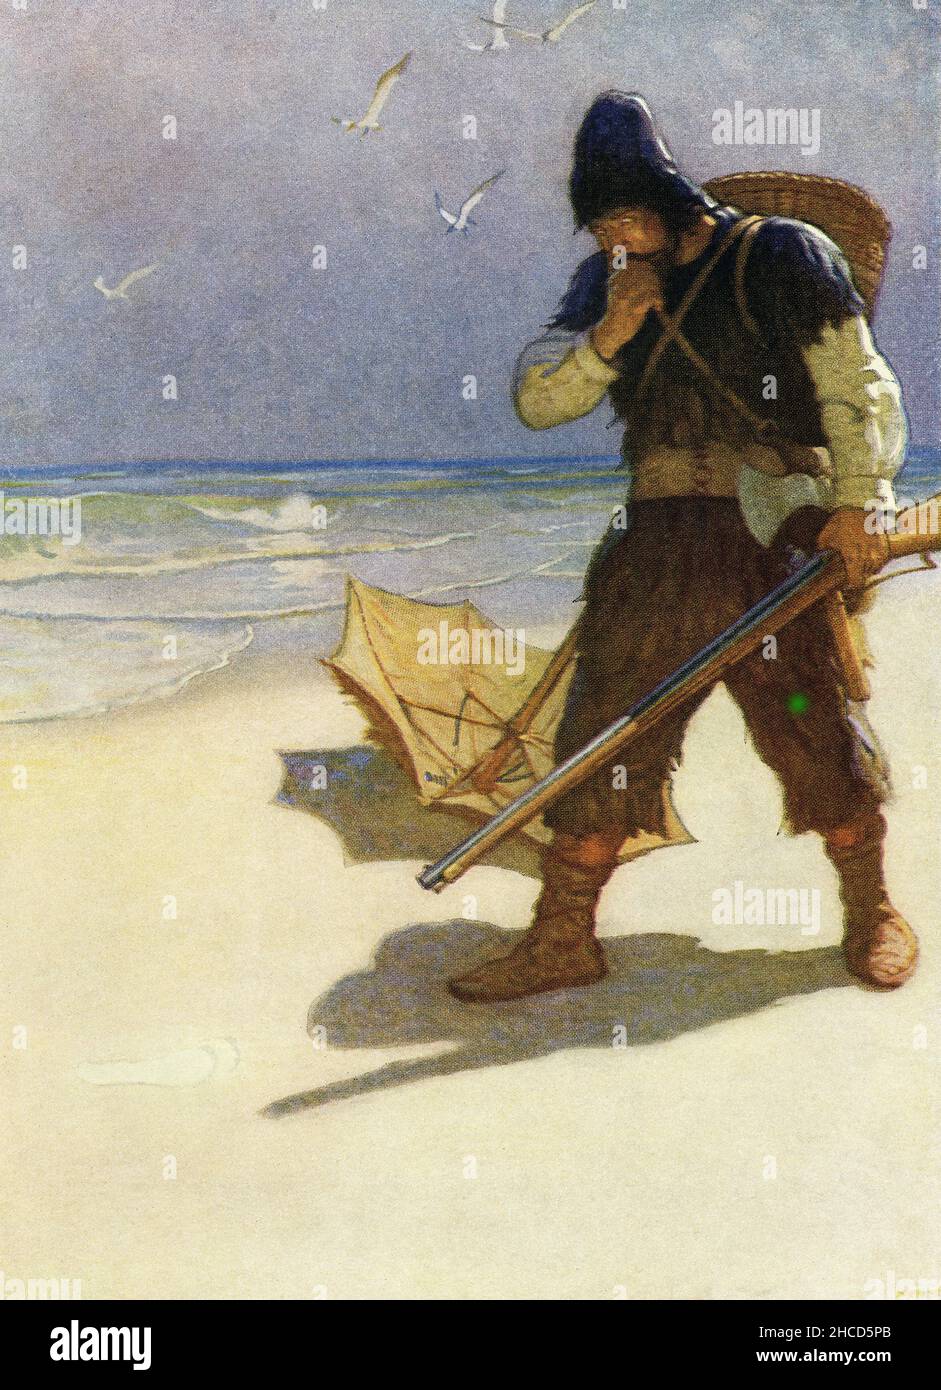 The caption for this image by NC Wyeth that accompanies the tale of Robinson Crusoe by Daniel Defoe reads: 'I stood like one thunderstruck or or as if I had seen an apparition.” Robinson Crusoe is a novel written by the English novelist Daniel Defoe and published in 1719. A fictional autobiography,  it tells the tale of an English castaway named  Robinson Crusoe (seen here on beach with umbrella) who spent 28 years on a remote tropical island near Venezuela before he was rescued.  Newell Convers Wyeth, known as N. C. Wyeth, was an American artist and illustrator. He was the pupil of artist How Stock Photo